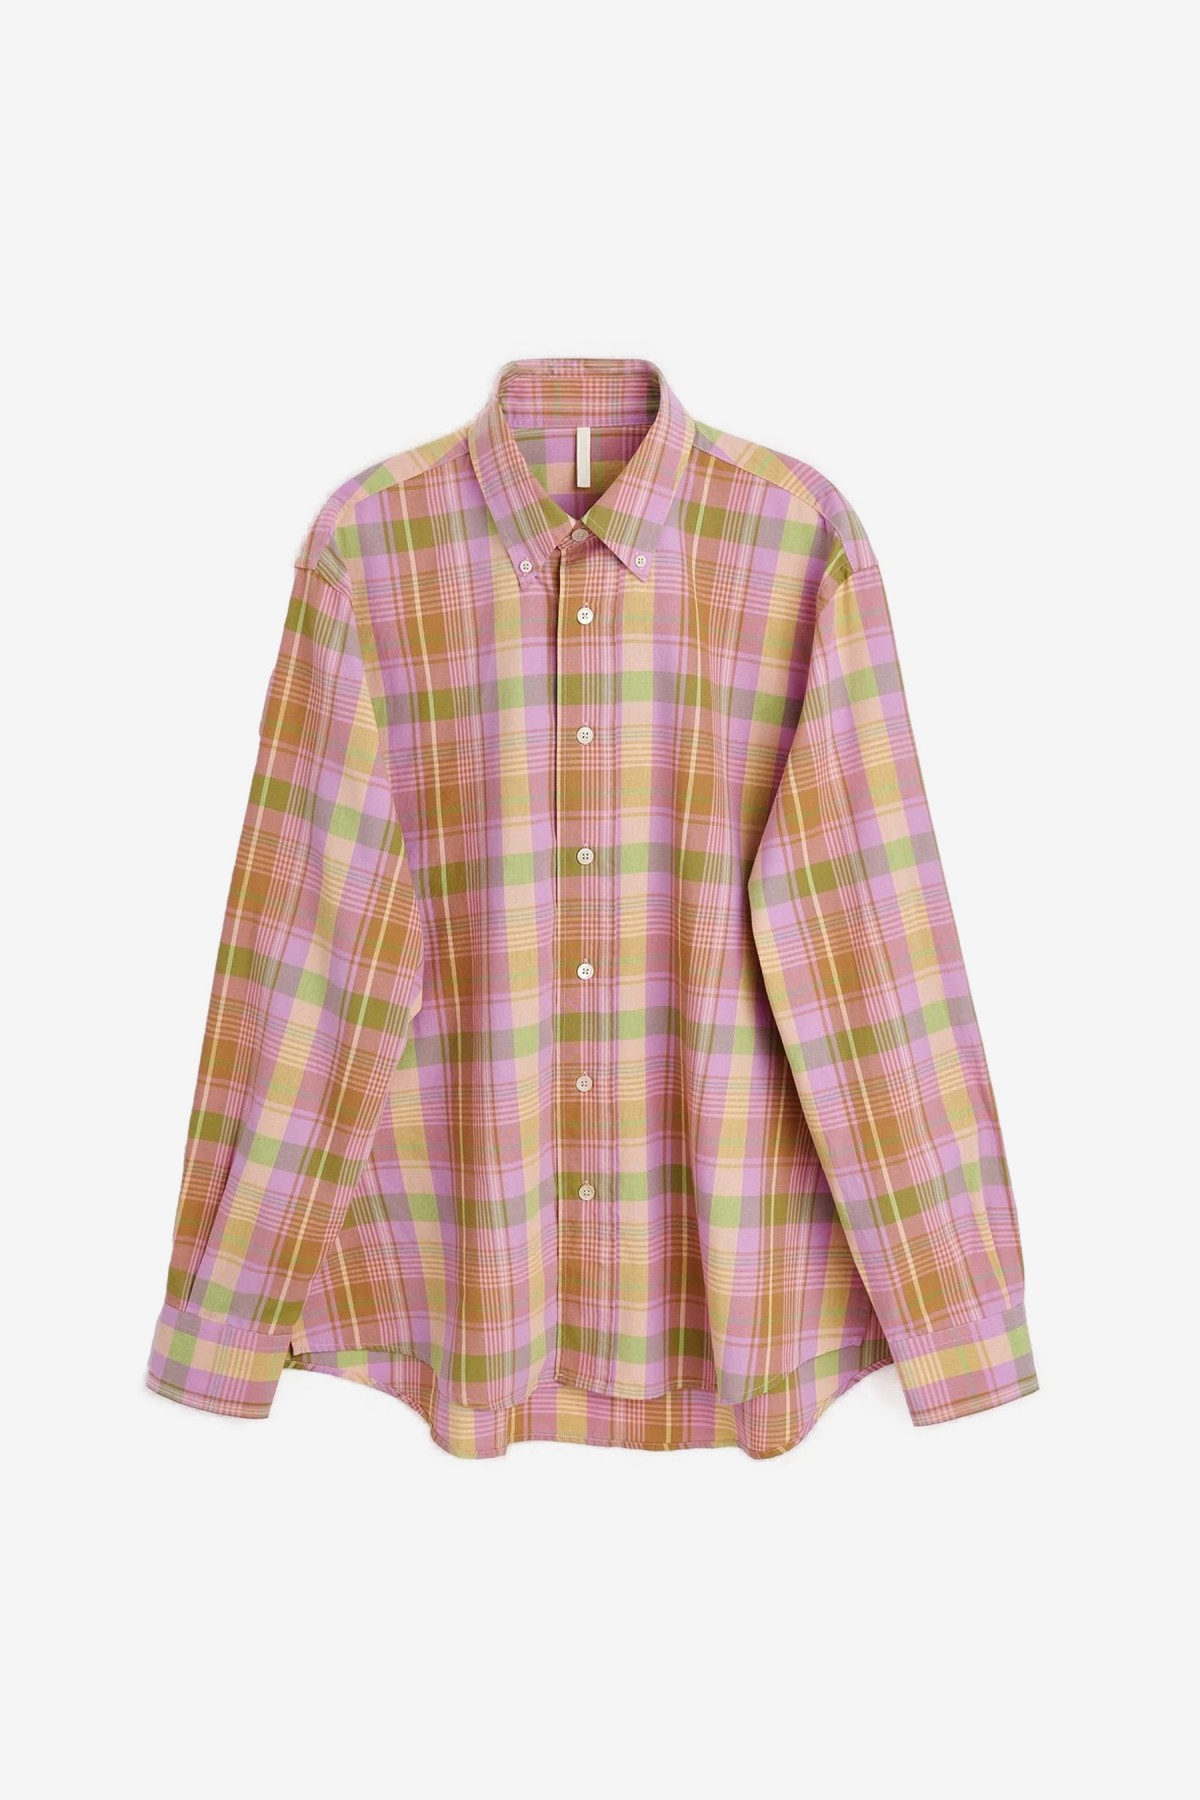 Sunflower Button Down Shirt in Pink Check